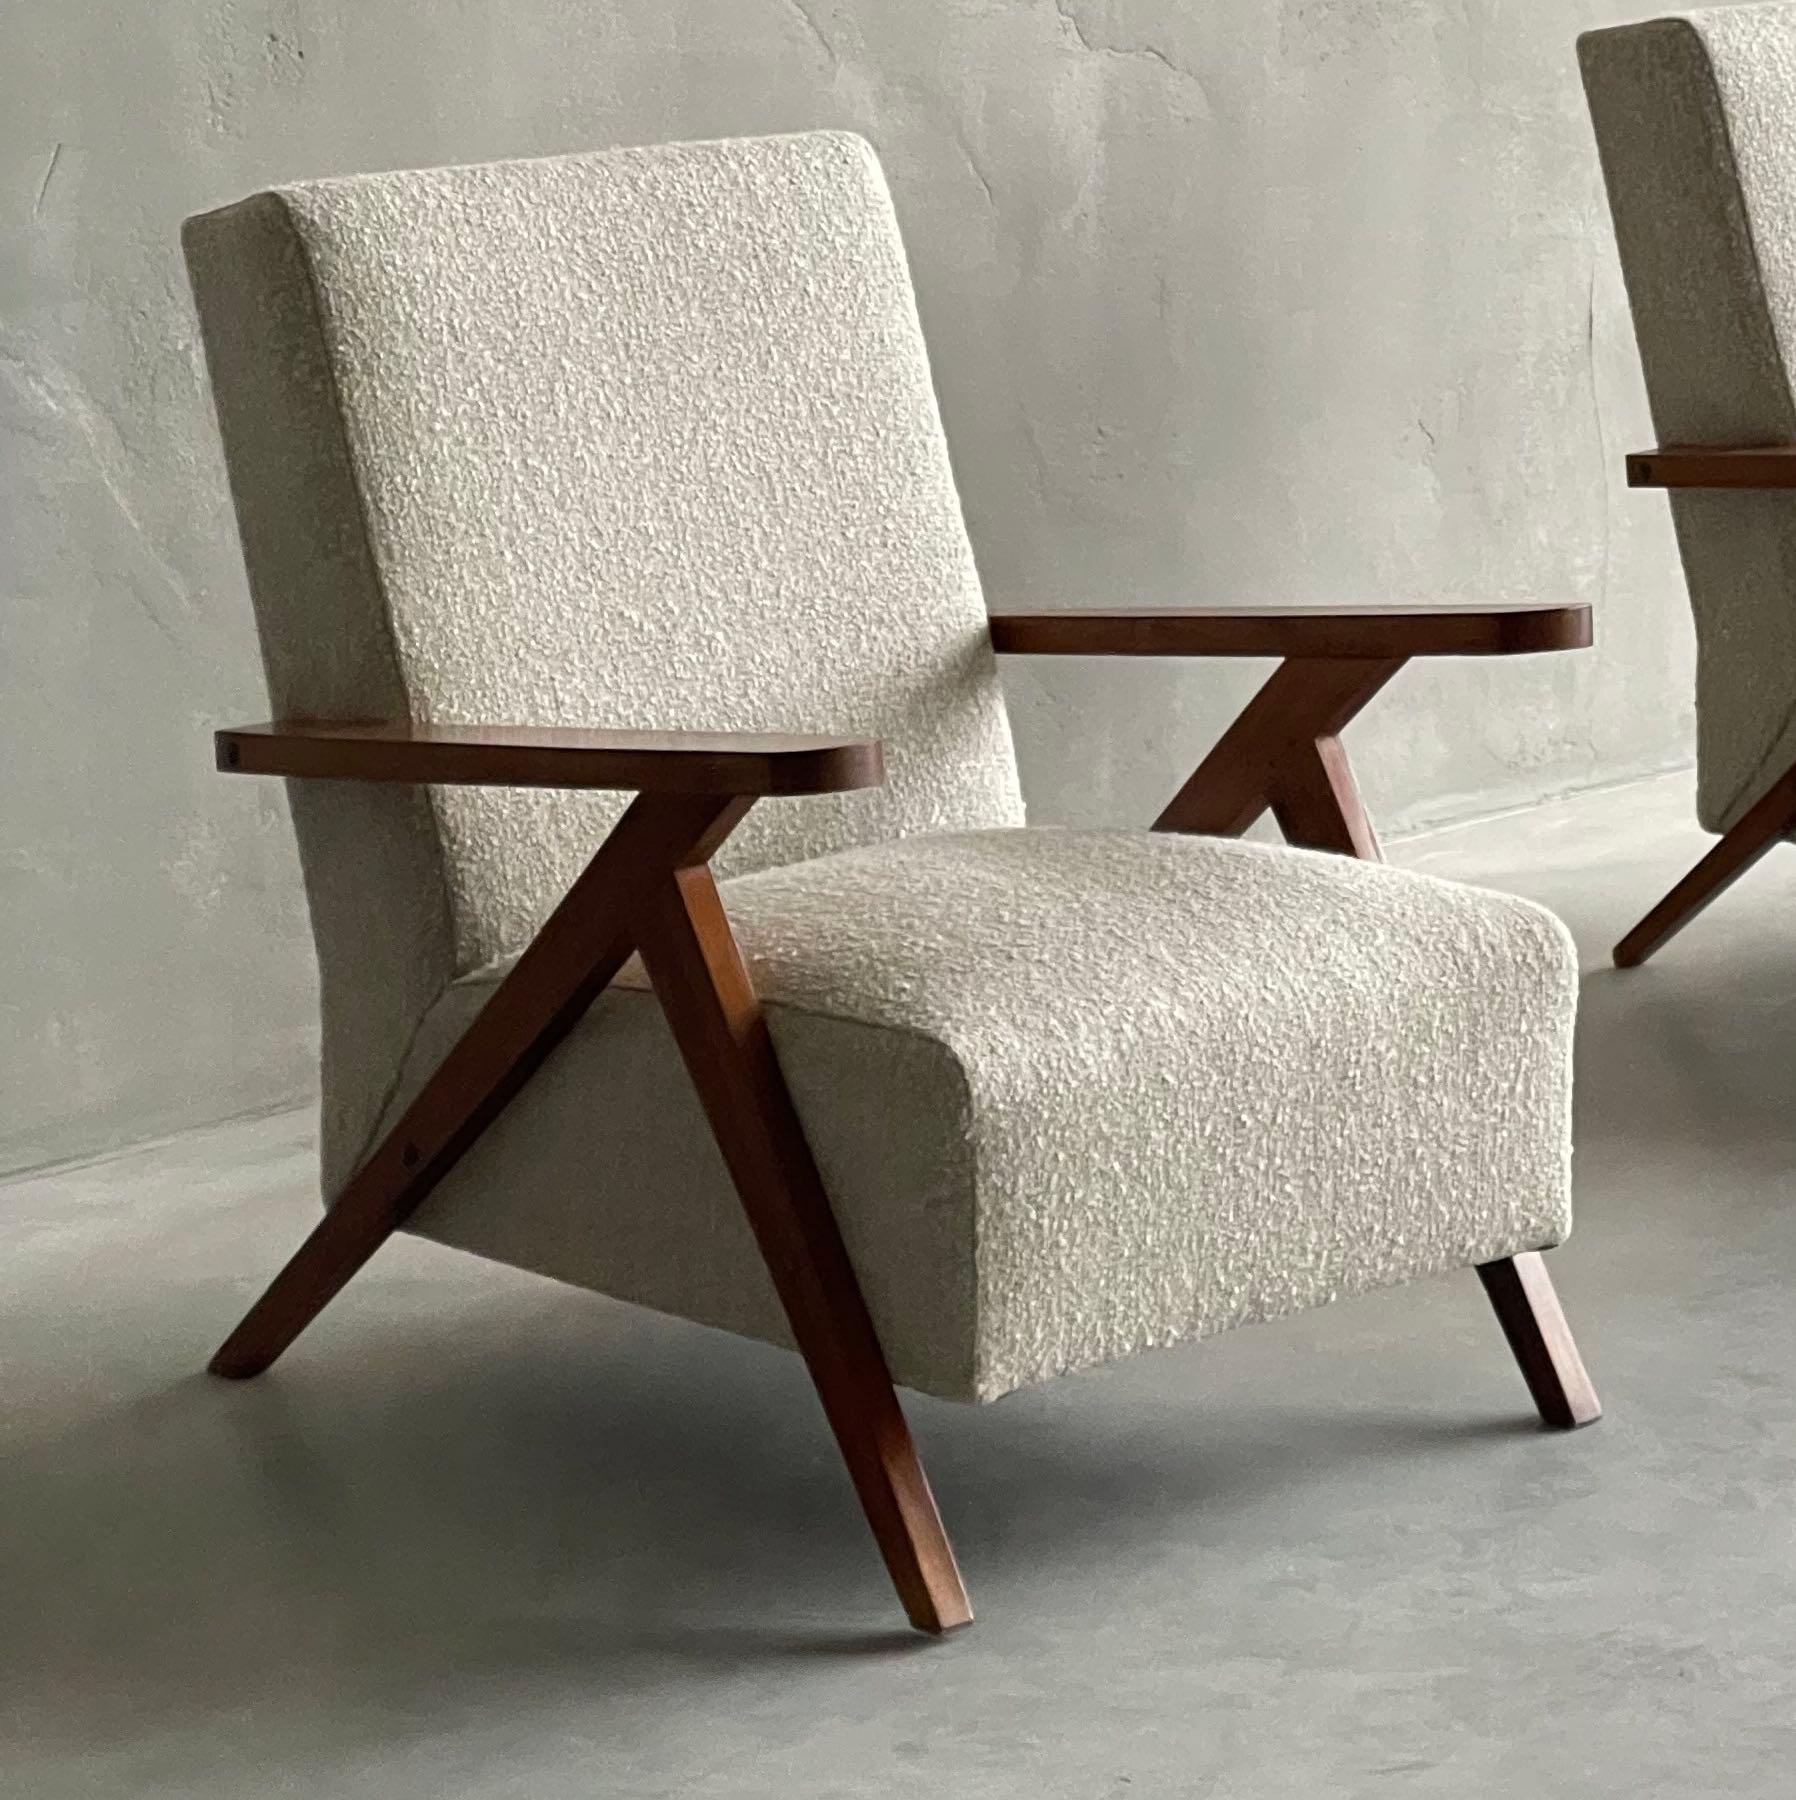 Upholstery Pair Compass Leg Upholstered Chairs, France, 1940s